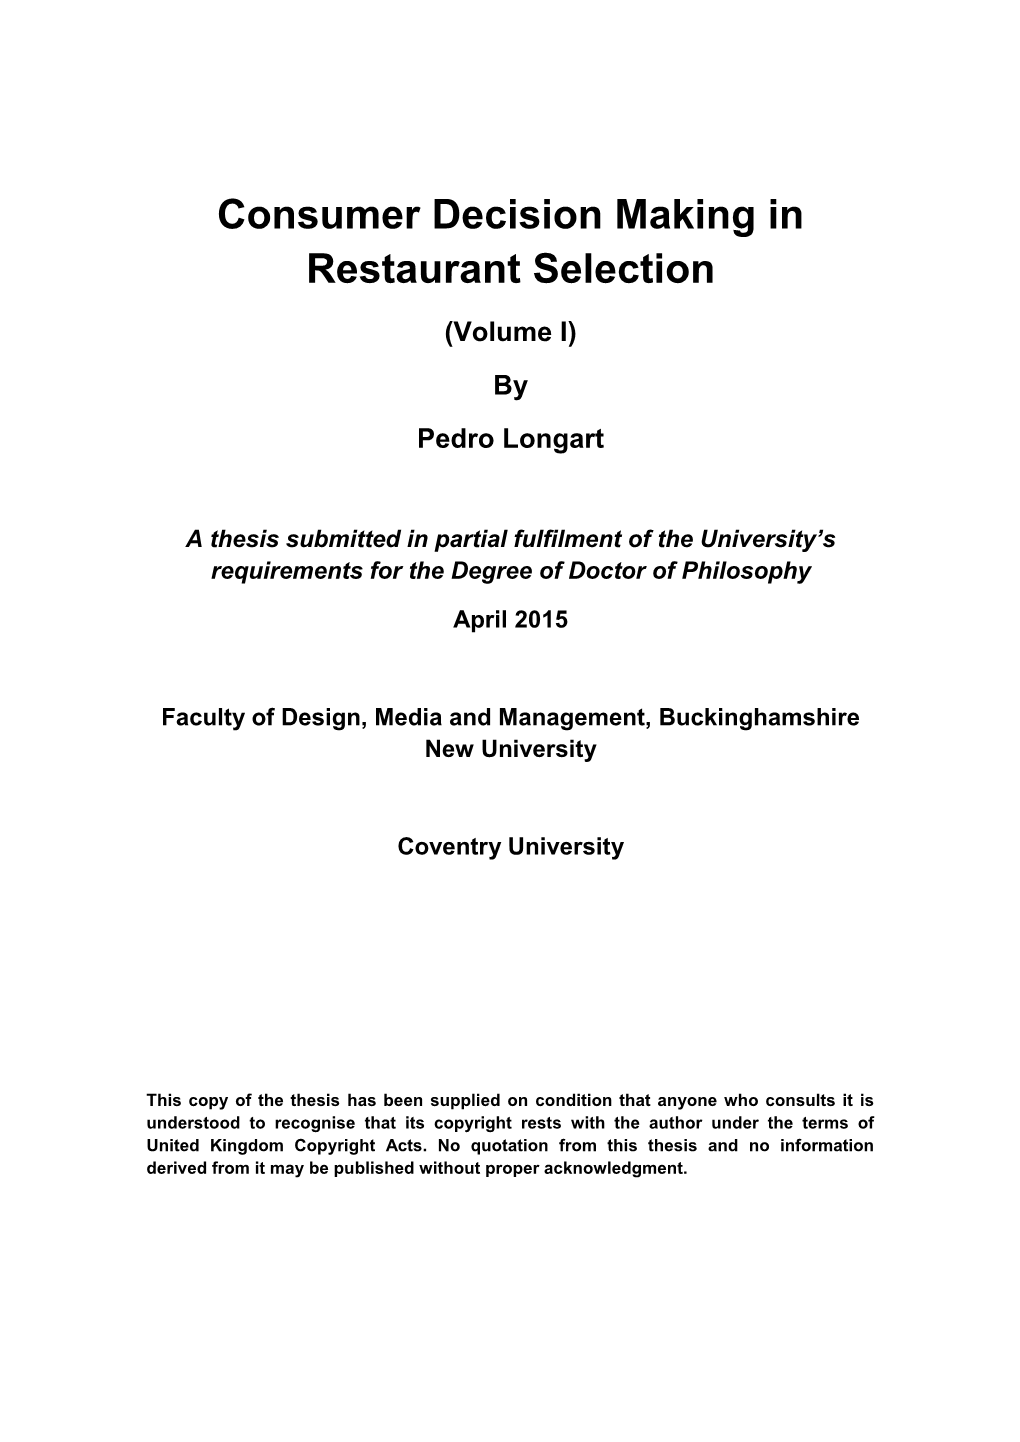 Consumer Decision Making in Restaurant Selection